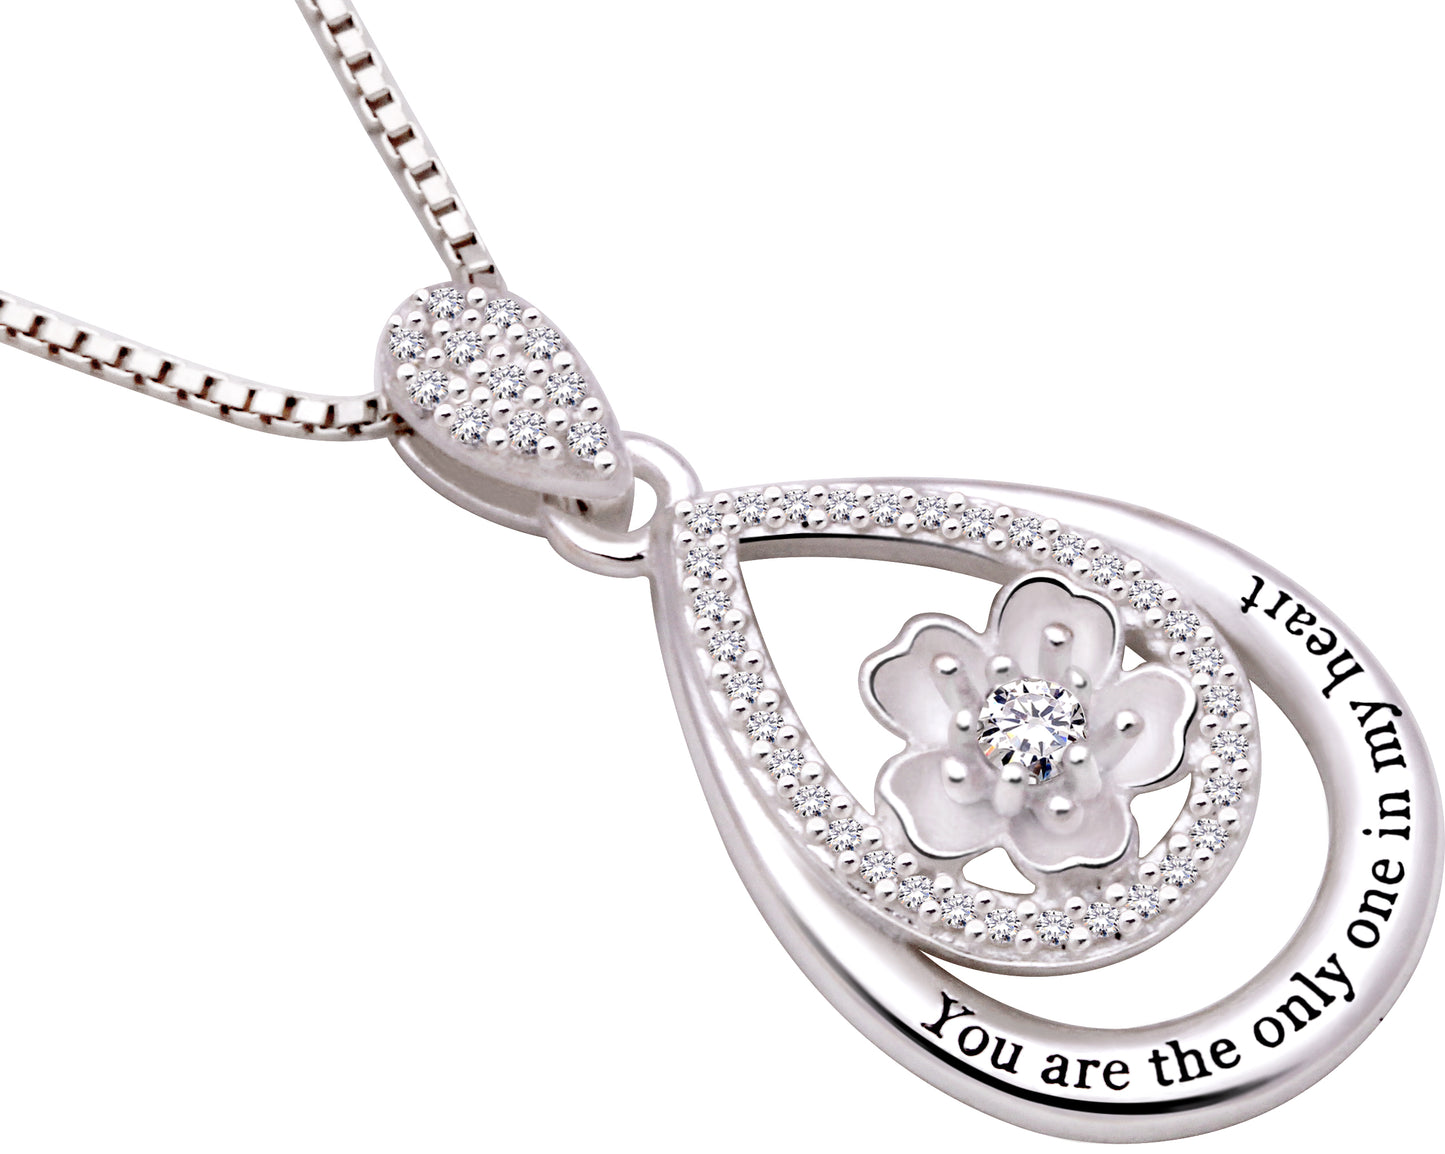 ALOV Jewelry Sterling Silver "You are the only one in my heart" Cubic Zirconia Pendant Necklace